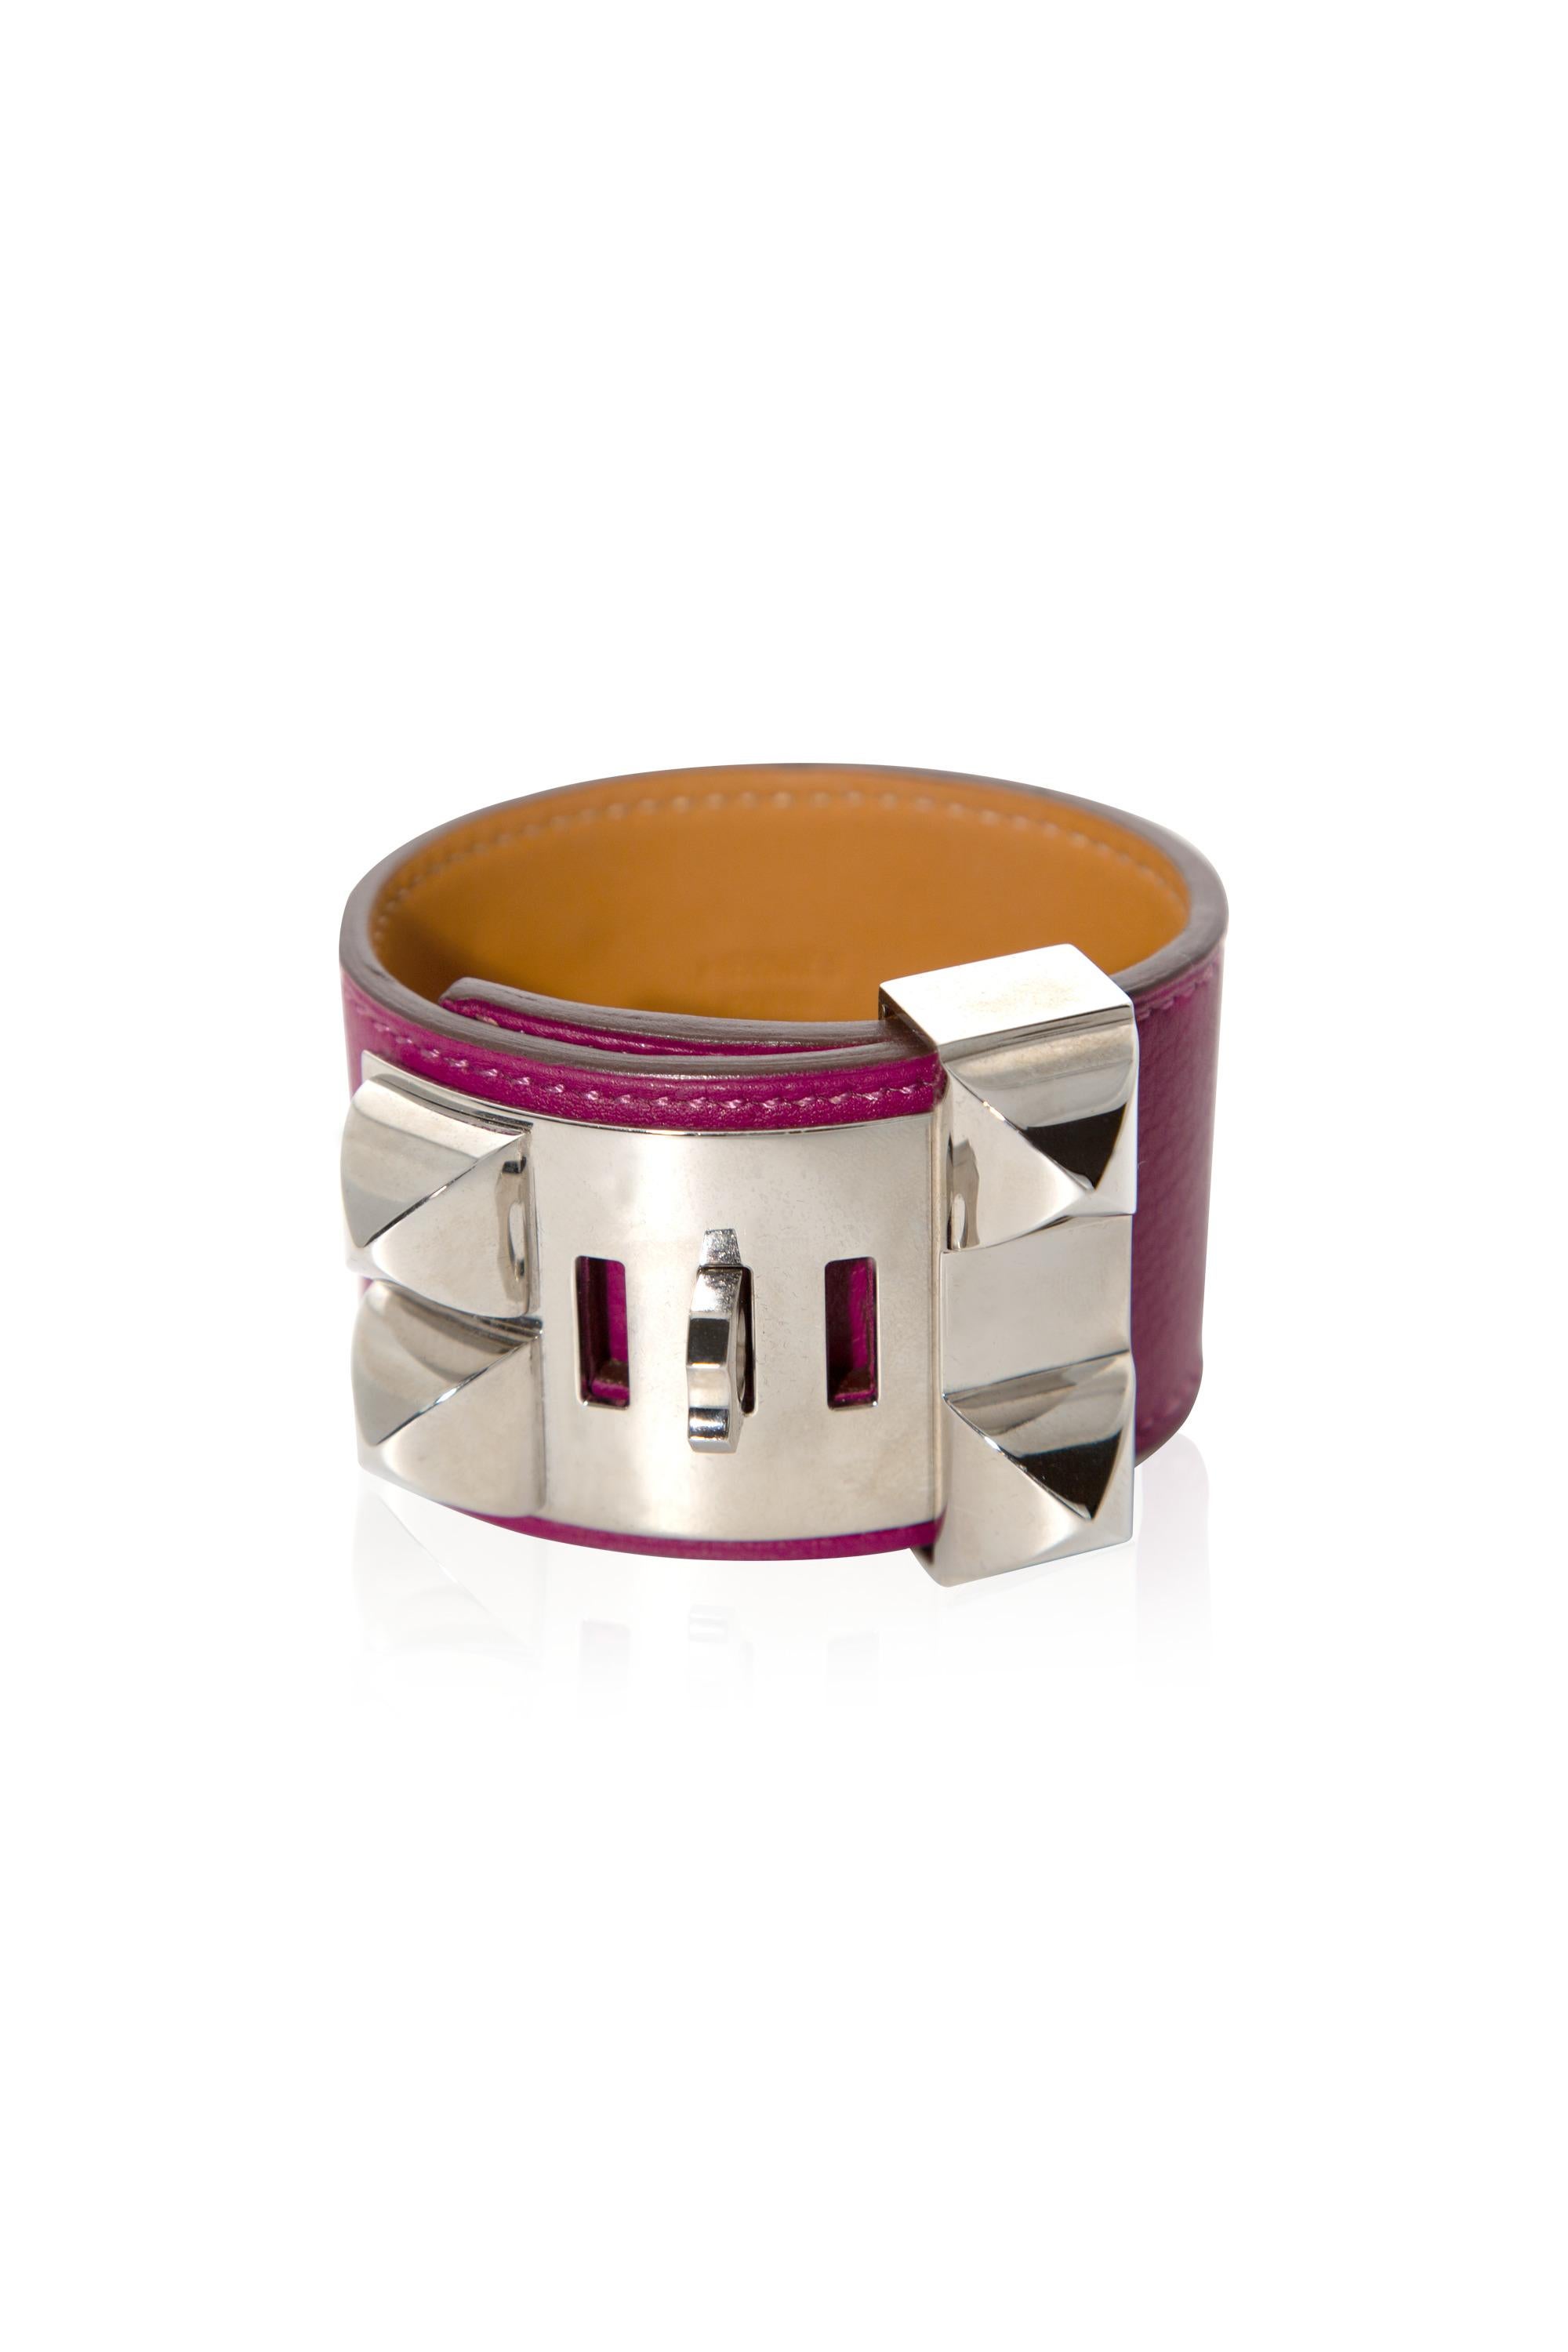 Hermès Collier de Chien Cuff is a fan favourite for being timeless with a rock’n’roll twist.

•This rare edition is crafted from tan calfskin leather
•Prune colour
•It is offset with palladium hardware
•Includes the bracelet’s signature studding and